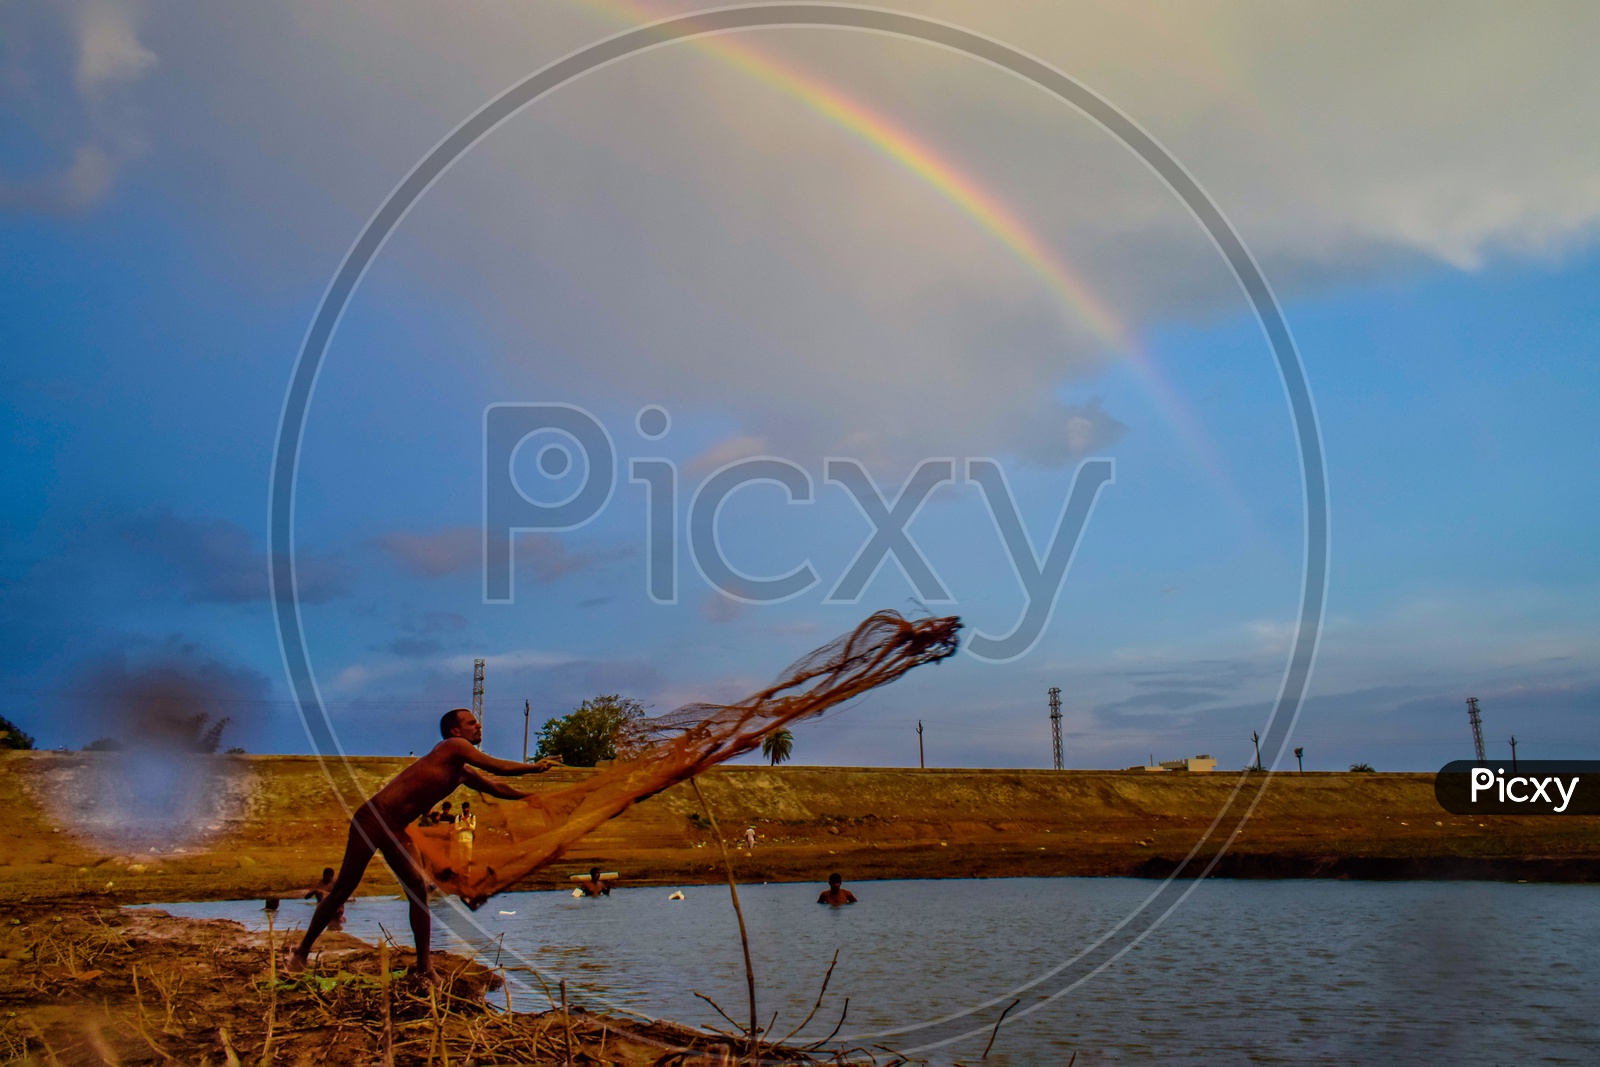 A Fisher Man Throwing Fishing Net into a Fishing Pond  With  Rainbow In Background